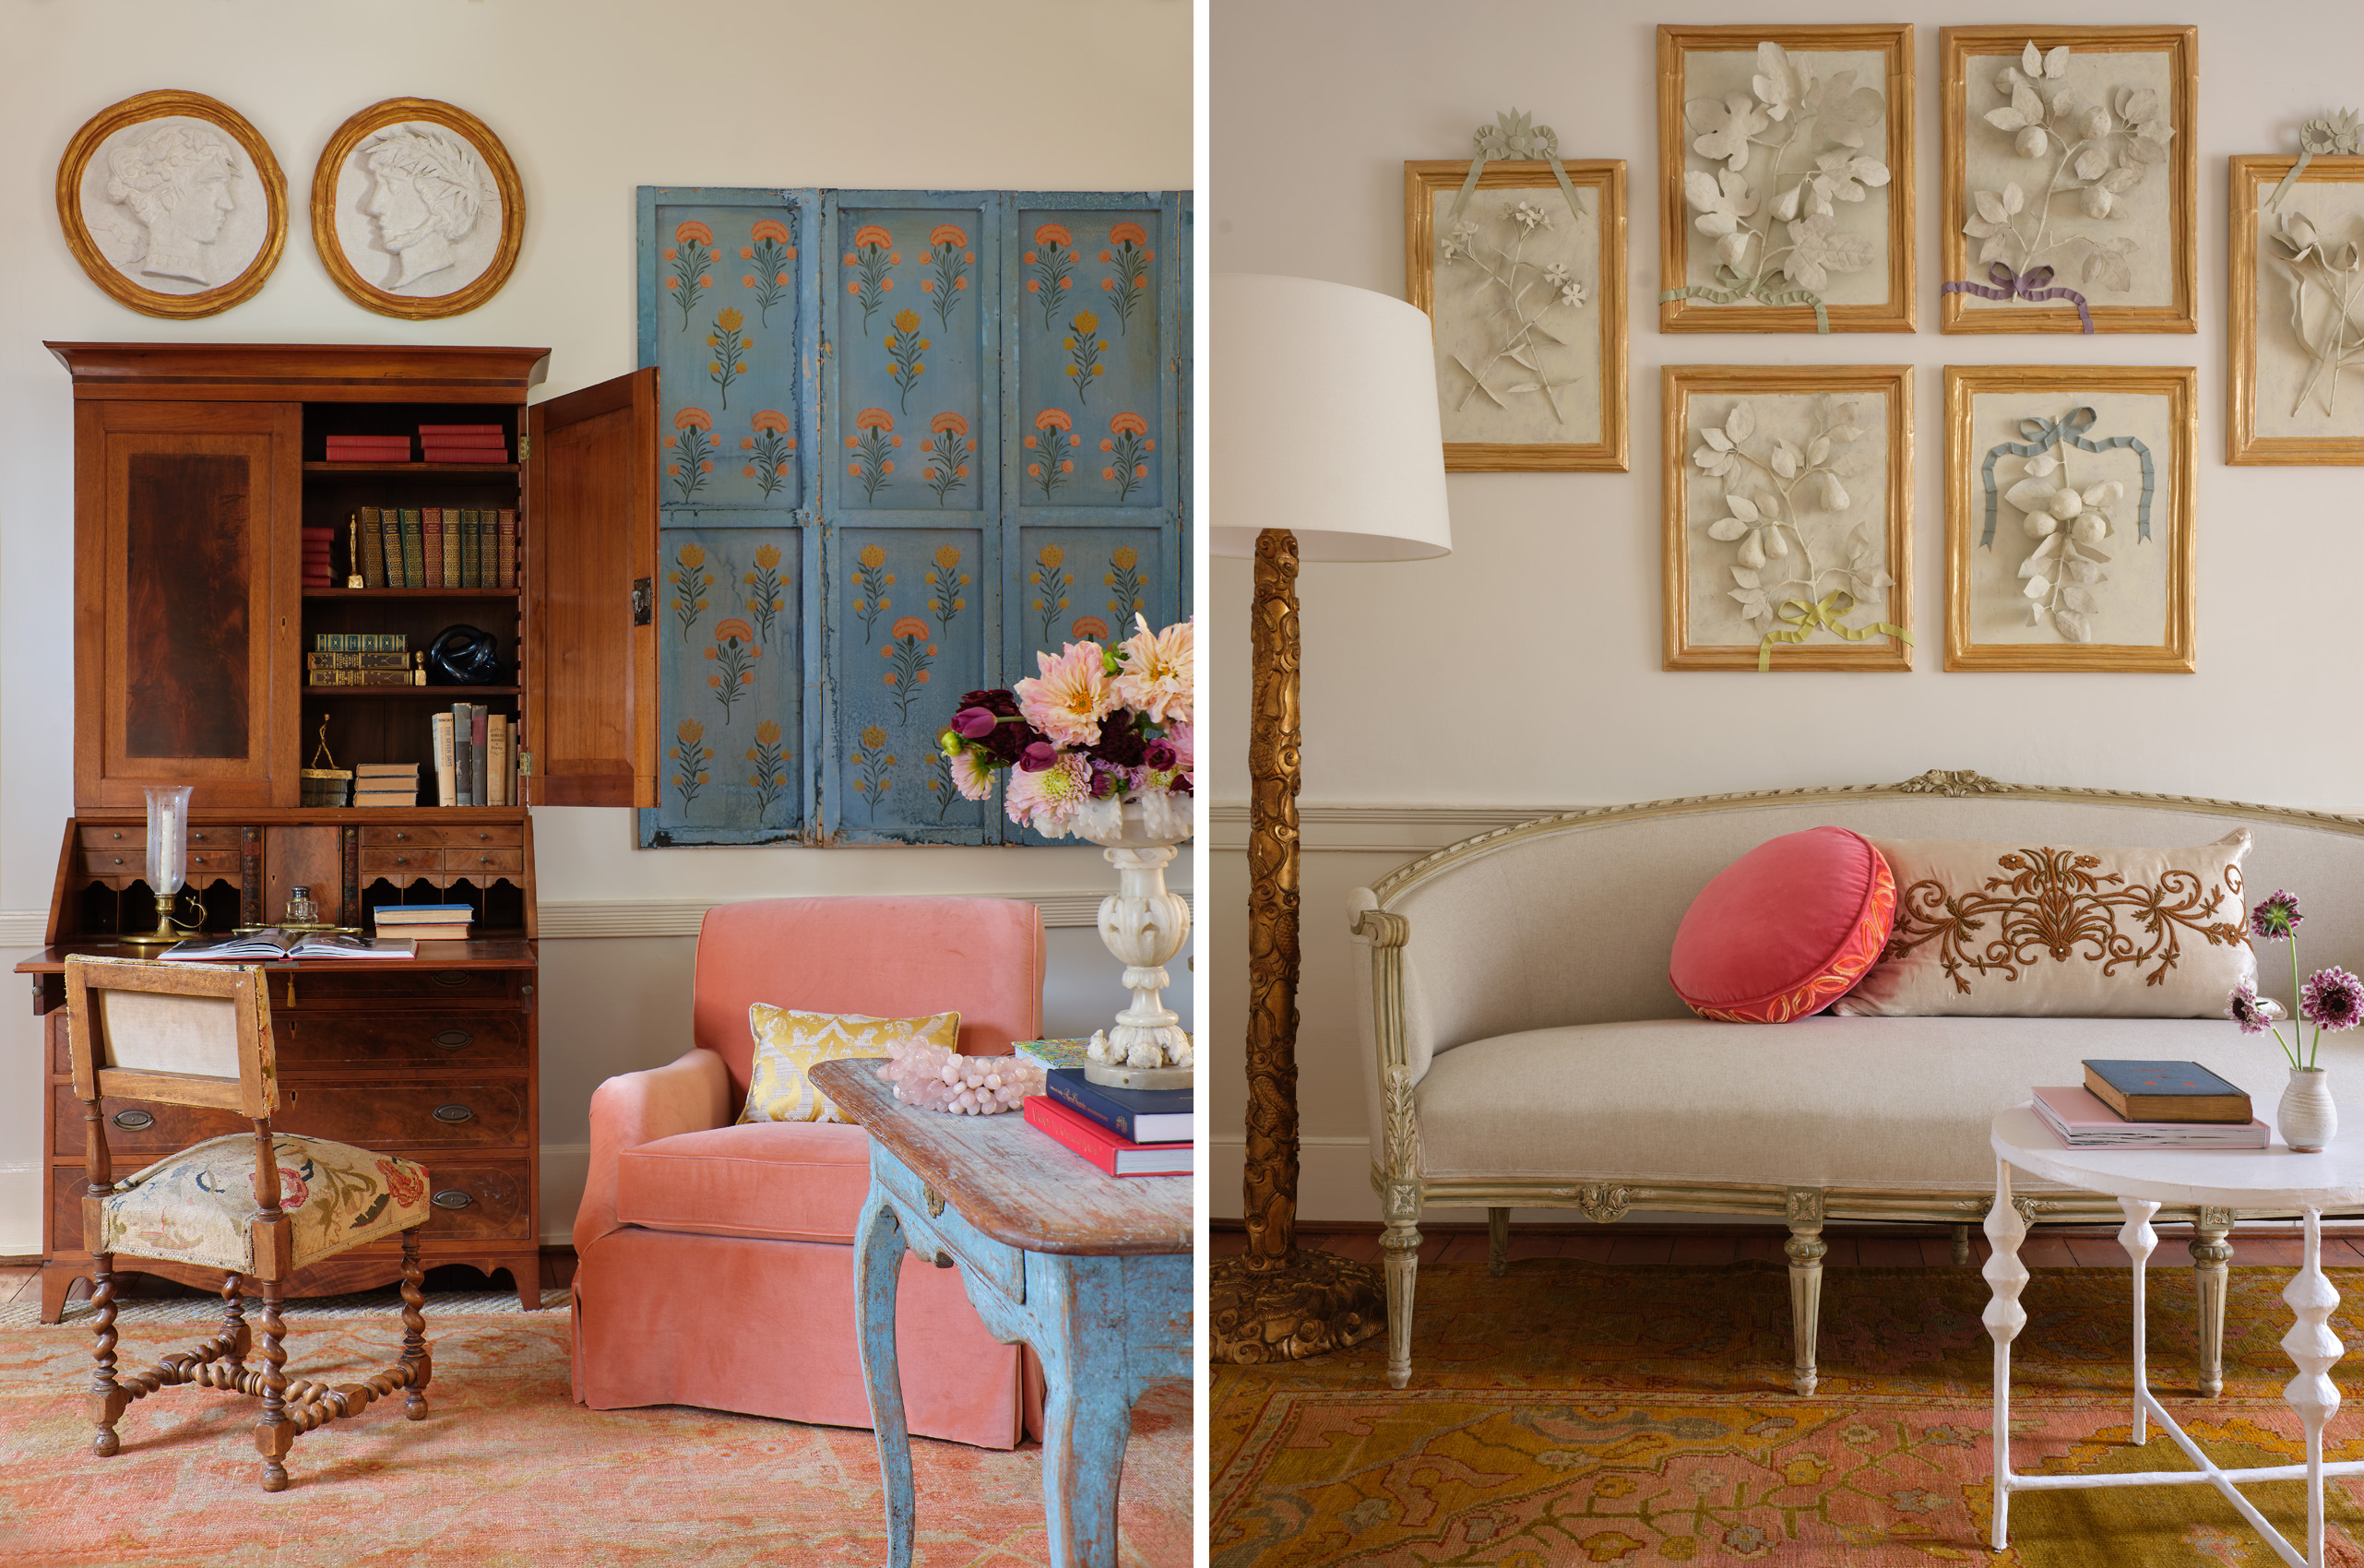 Classic Virginia House designed by Janie Molster, photographed by Mali Azima for her book House Dressing. 